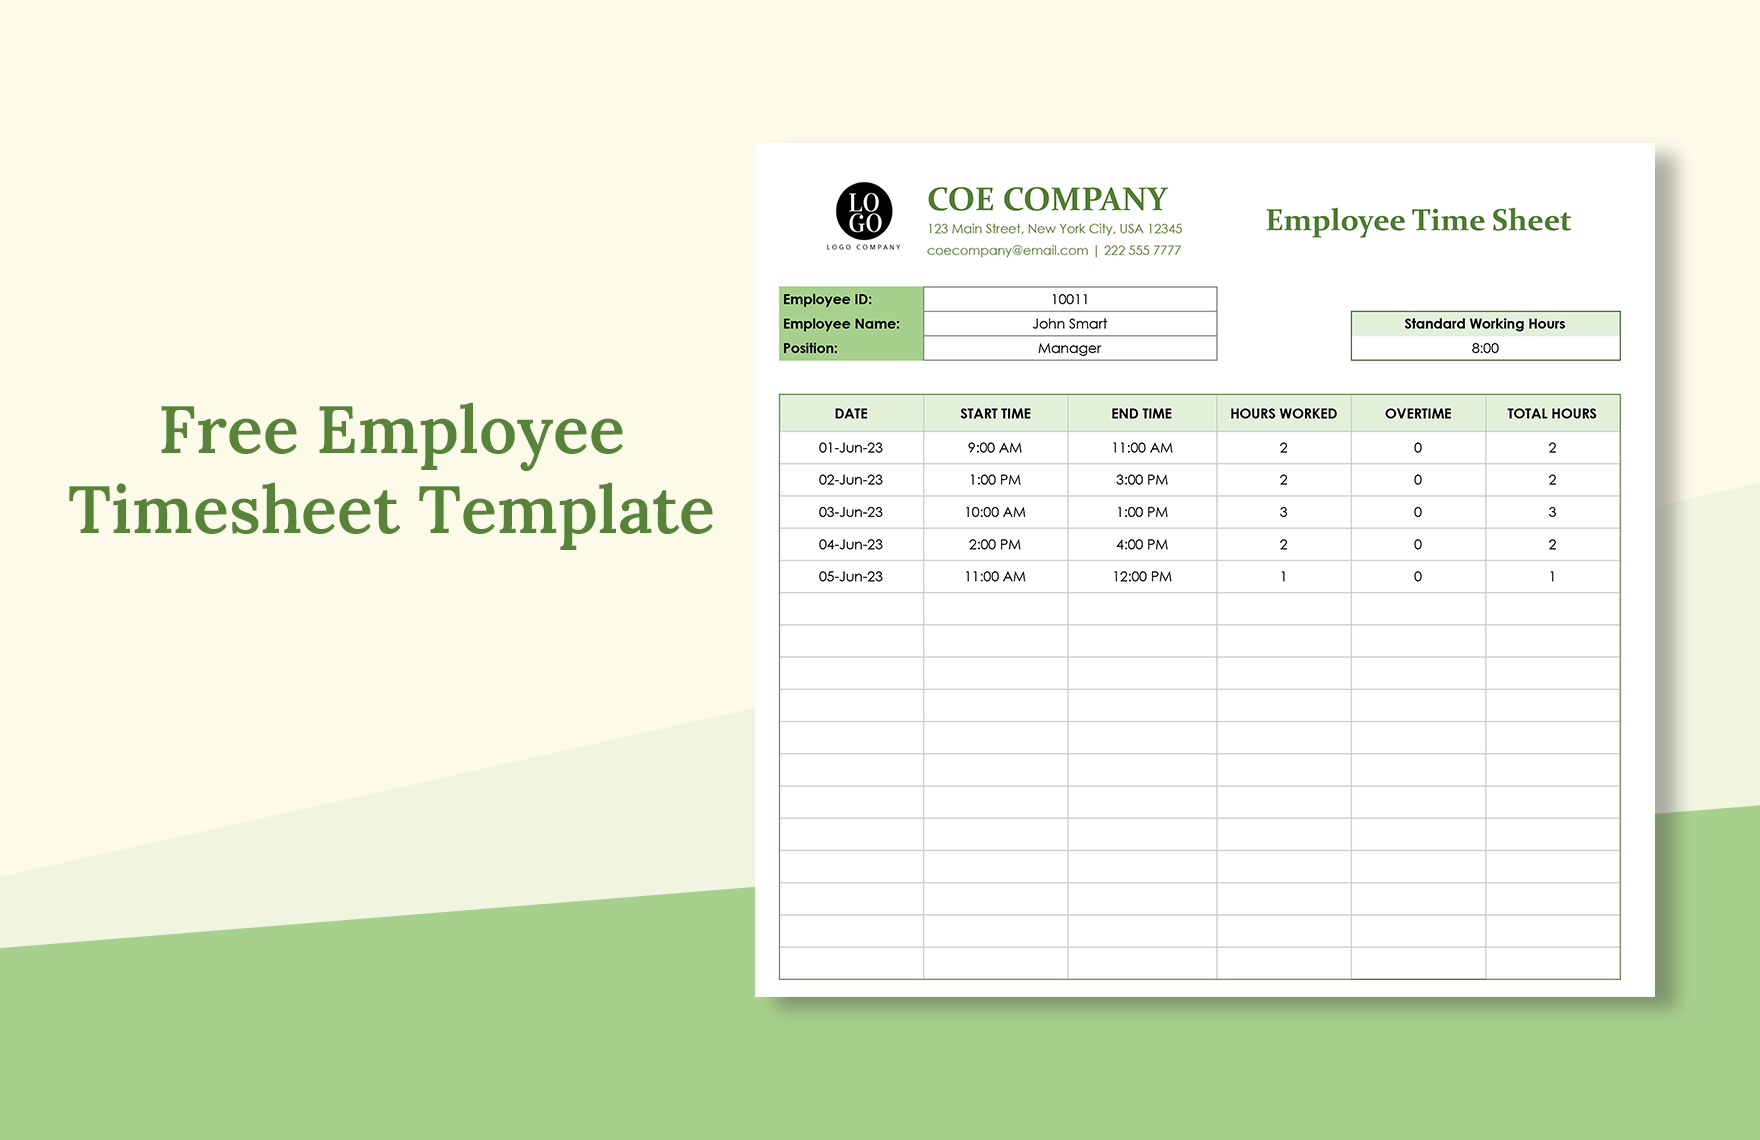 FREE Employee Timesheet Template Download in Word Google Docs Excel